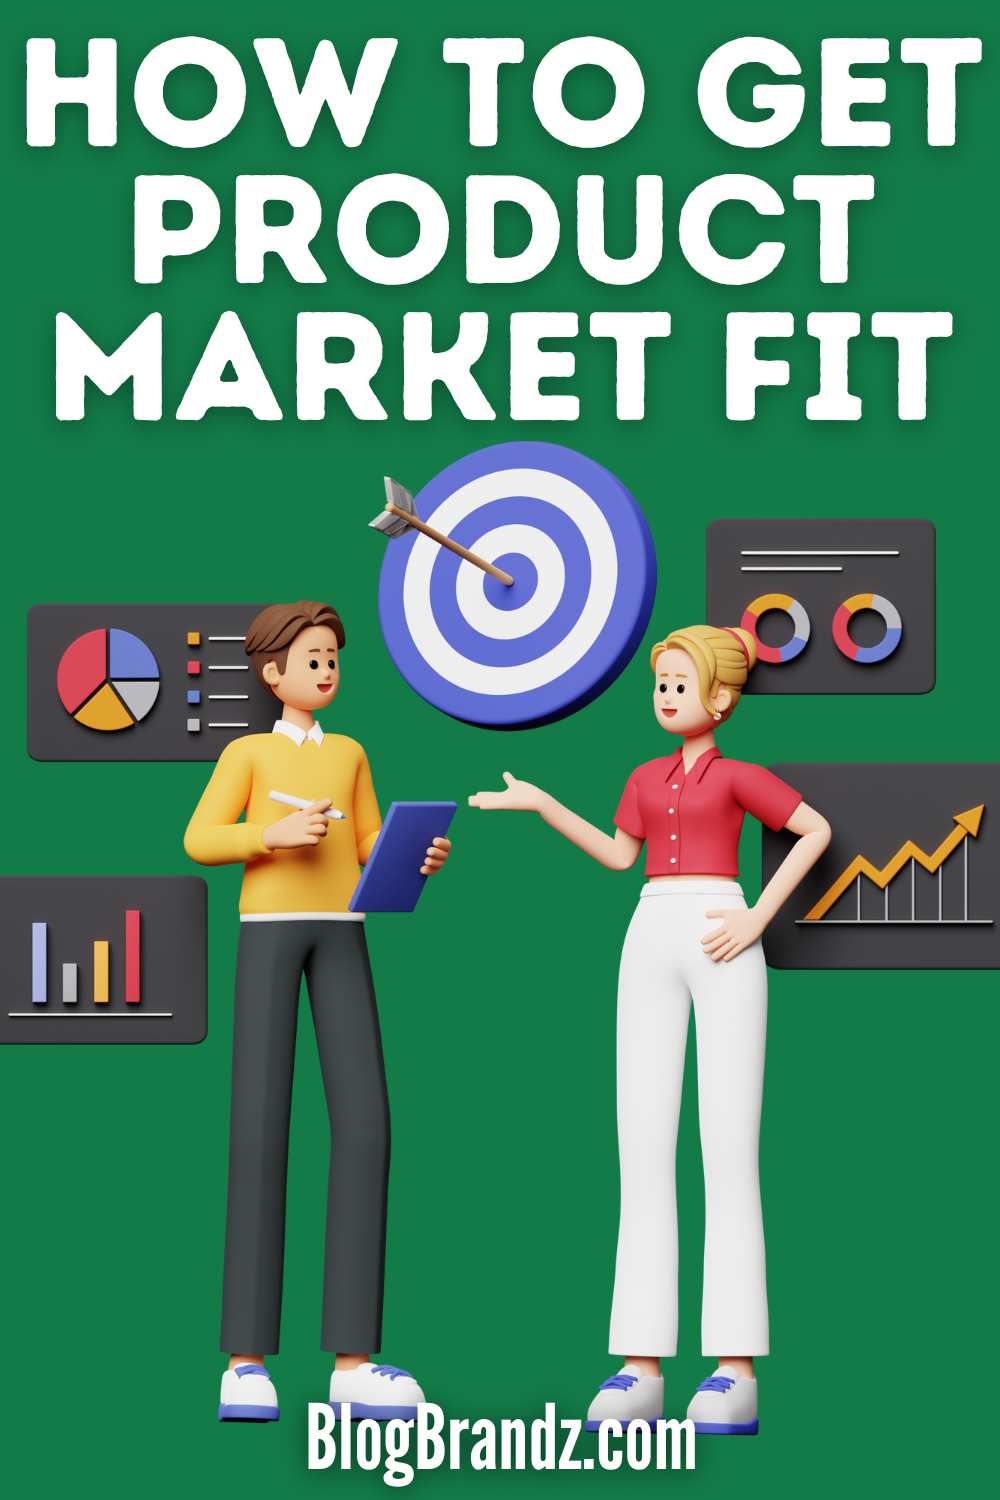 How To Get Product Market Fit